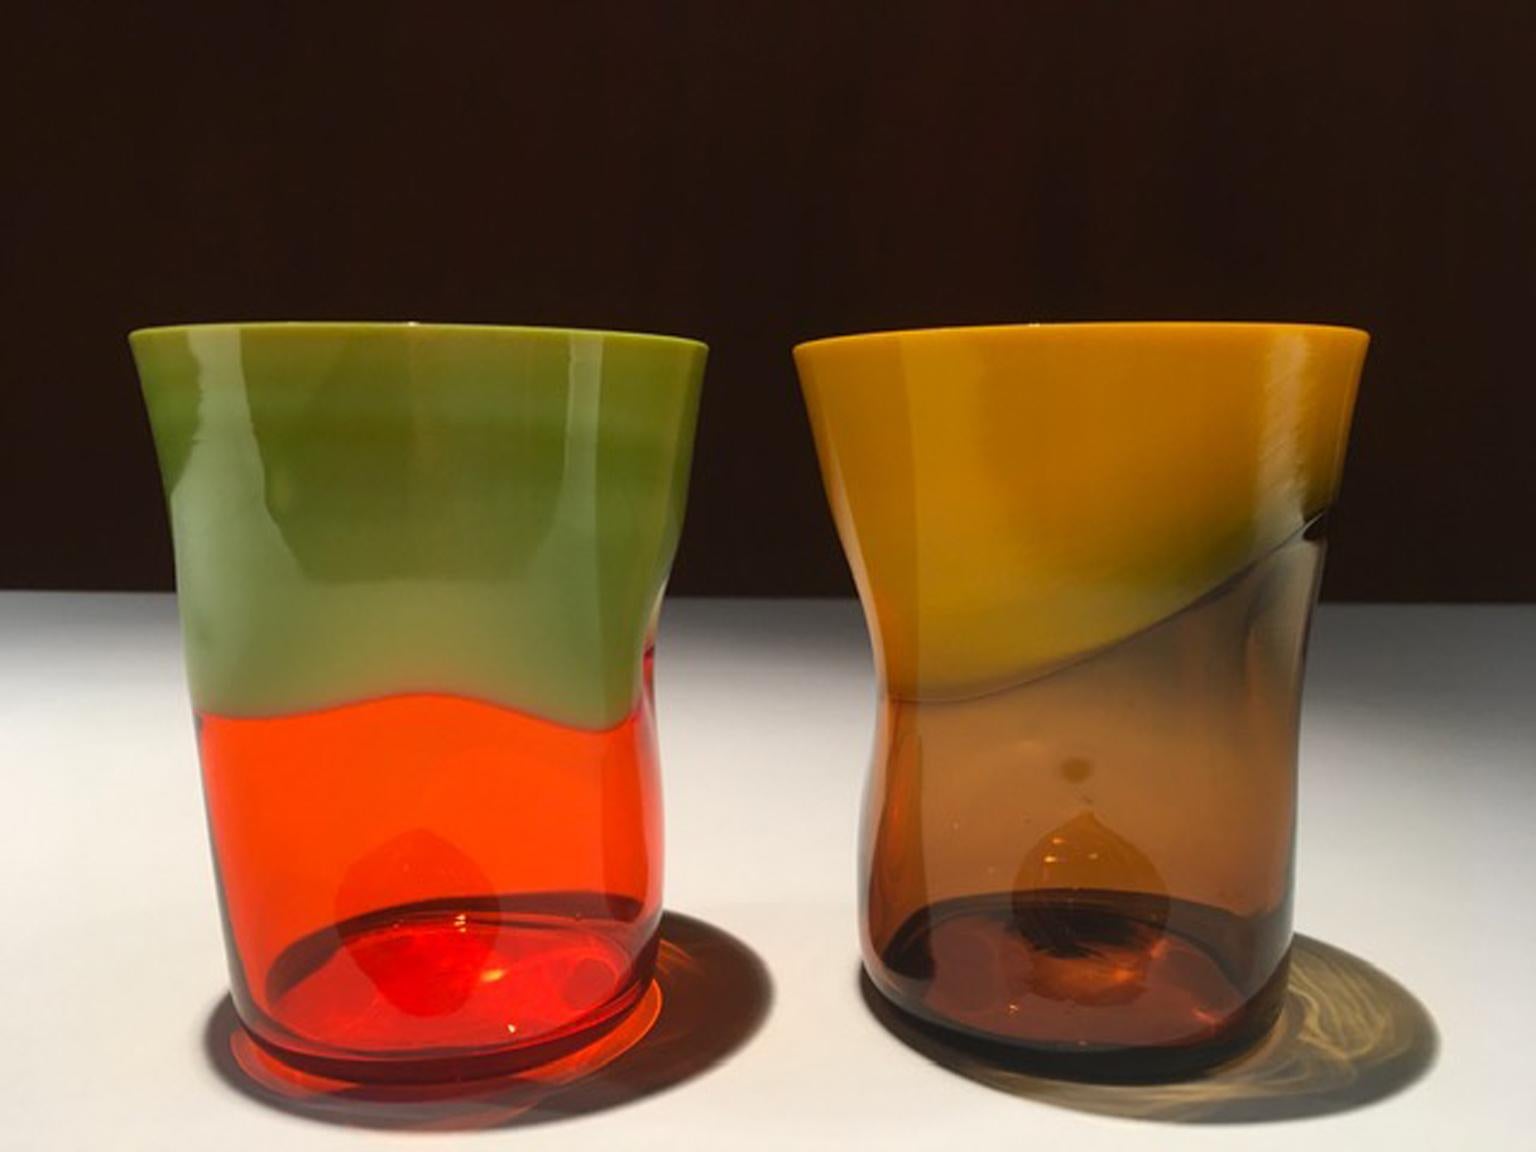 This is an original Murano, Venice handmade production. This pair is composed by two pieces one in orange and green, the other one in amber and yellow. The abstract form it is their peculiarity, no one it is ugual to the other. This is the